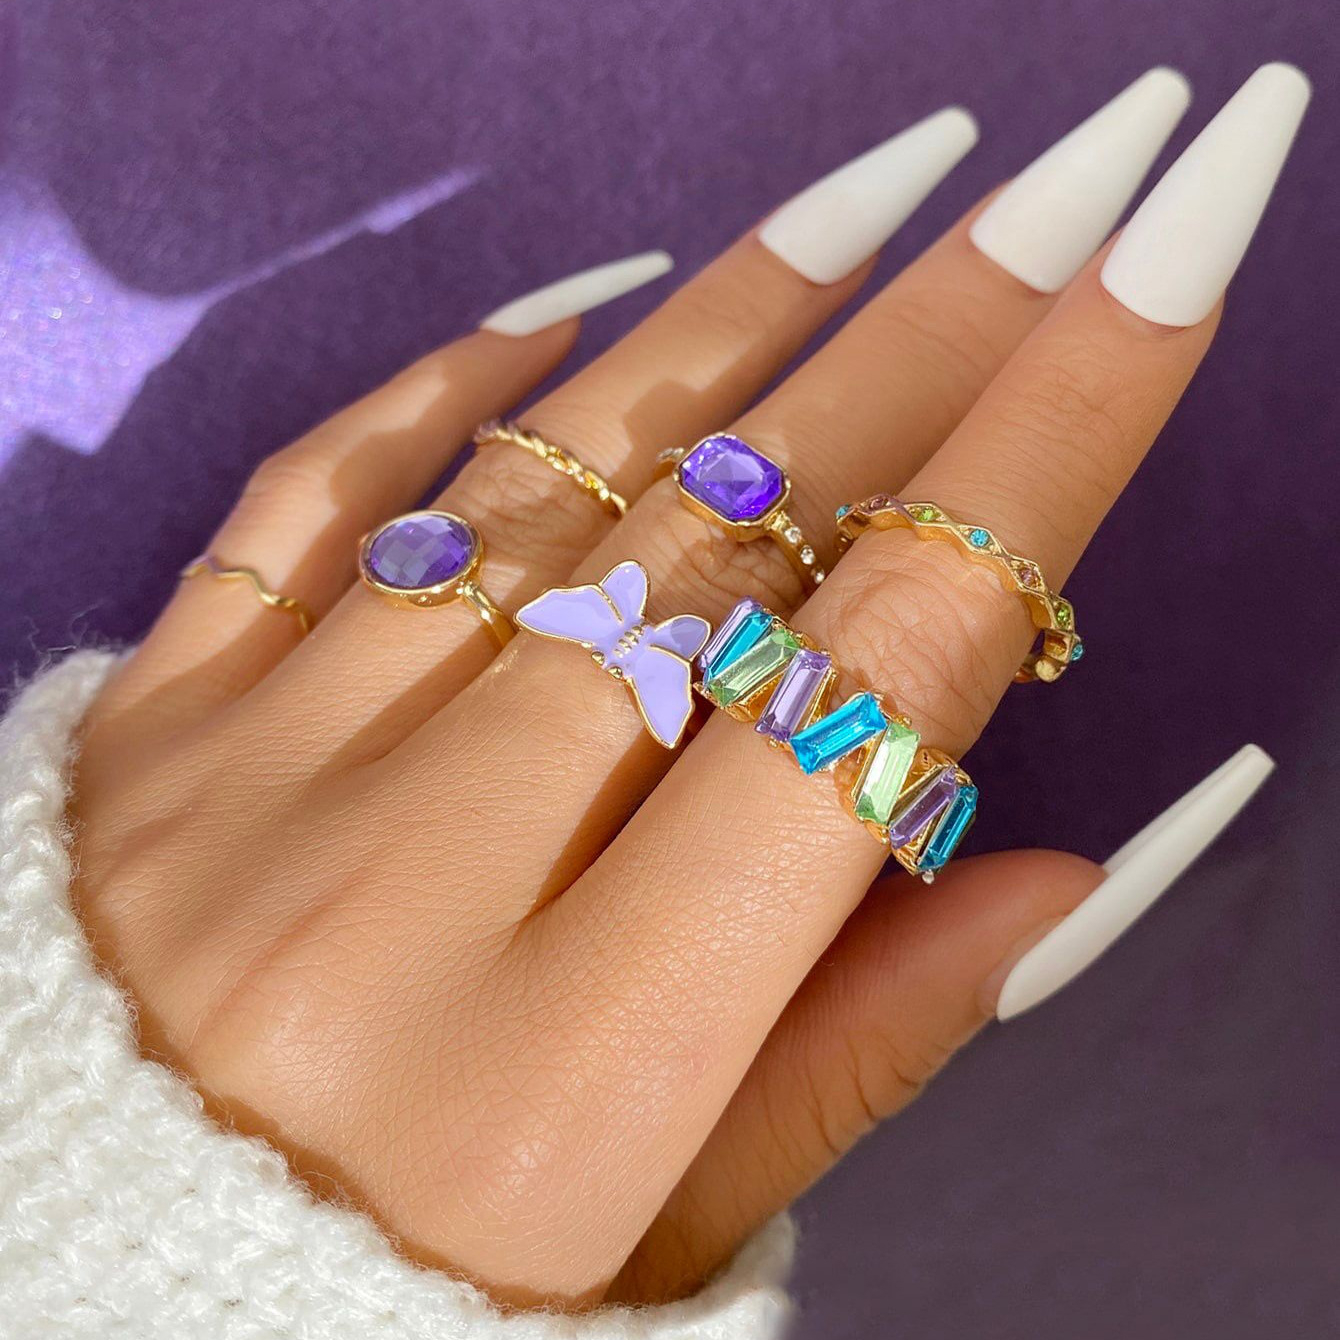 5589501 7Pcs Metal Gold Color Butterfly Ring Set Trendy Purple Crystal Stone Ring Women Fashion Bohemian Twist Rings Jewelry